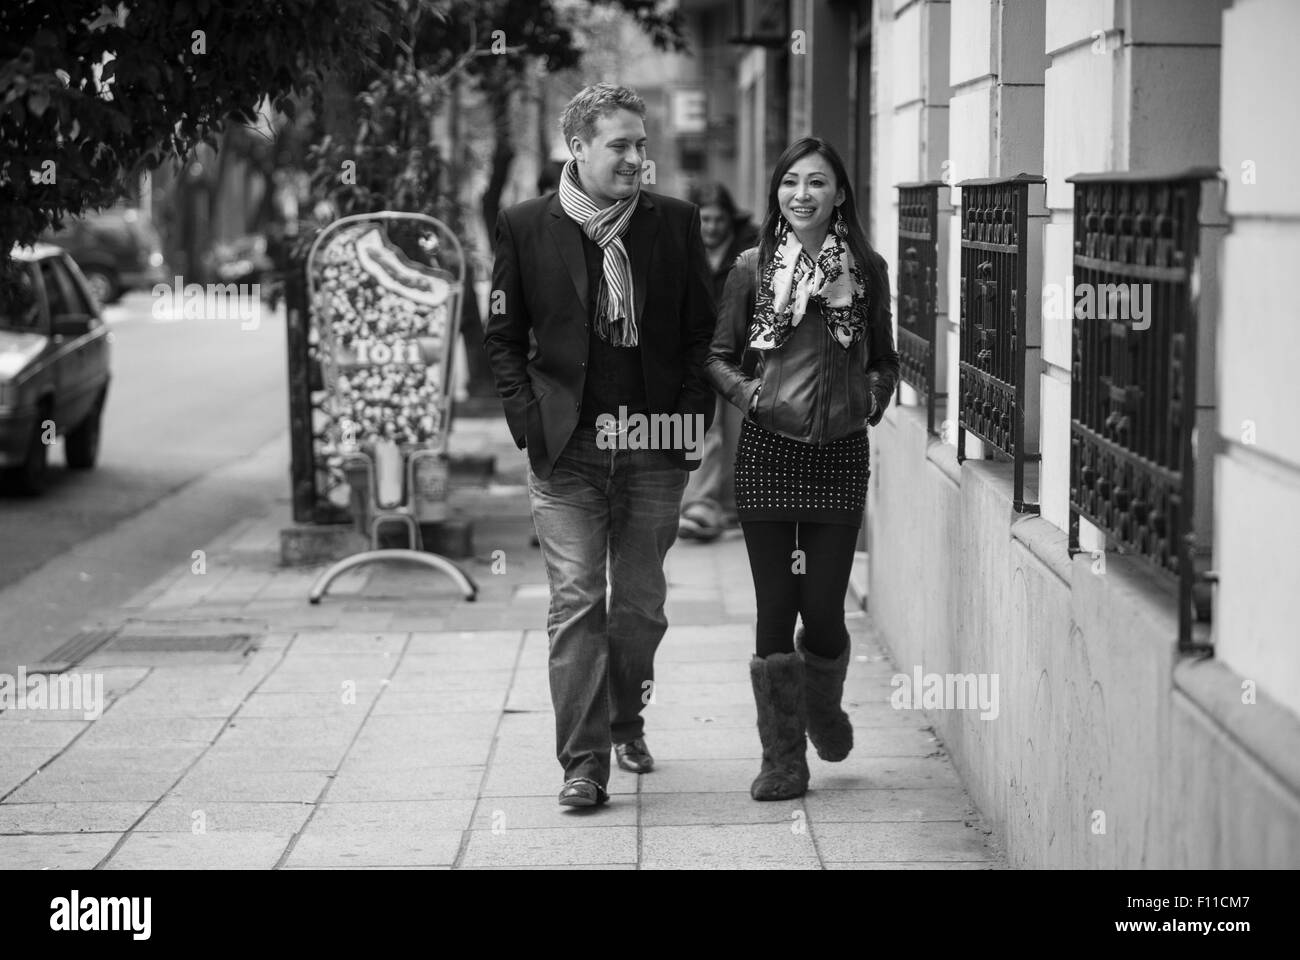 (150825) -- BUENOS AIRES, Aug. 25, 2015 (Xinhua) -- Chinese dancer Ping Yu and her Ukrainian partner Sergiy Podbolotnyy leave the studio after their rehearsal for the semifinal of the Tango World Cup in Buenos Aires city, capital of Argentina, on Aug. 20, 2015. Tango is sweeping across Argentina's borders, taking Asia, especially China, by storm. This year's key competitive event, the 2015 Tango Festival and World Cup, which is being held Aug. 14 to 27 in Argentina's capital Buenos Aires, features couples from around the globe, including a Ukrainian/Chinese couple. Ukrainian-born dancer Sergiy Stock Photo